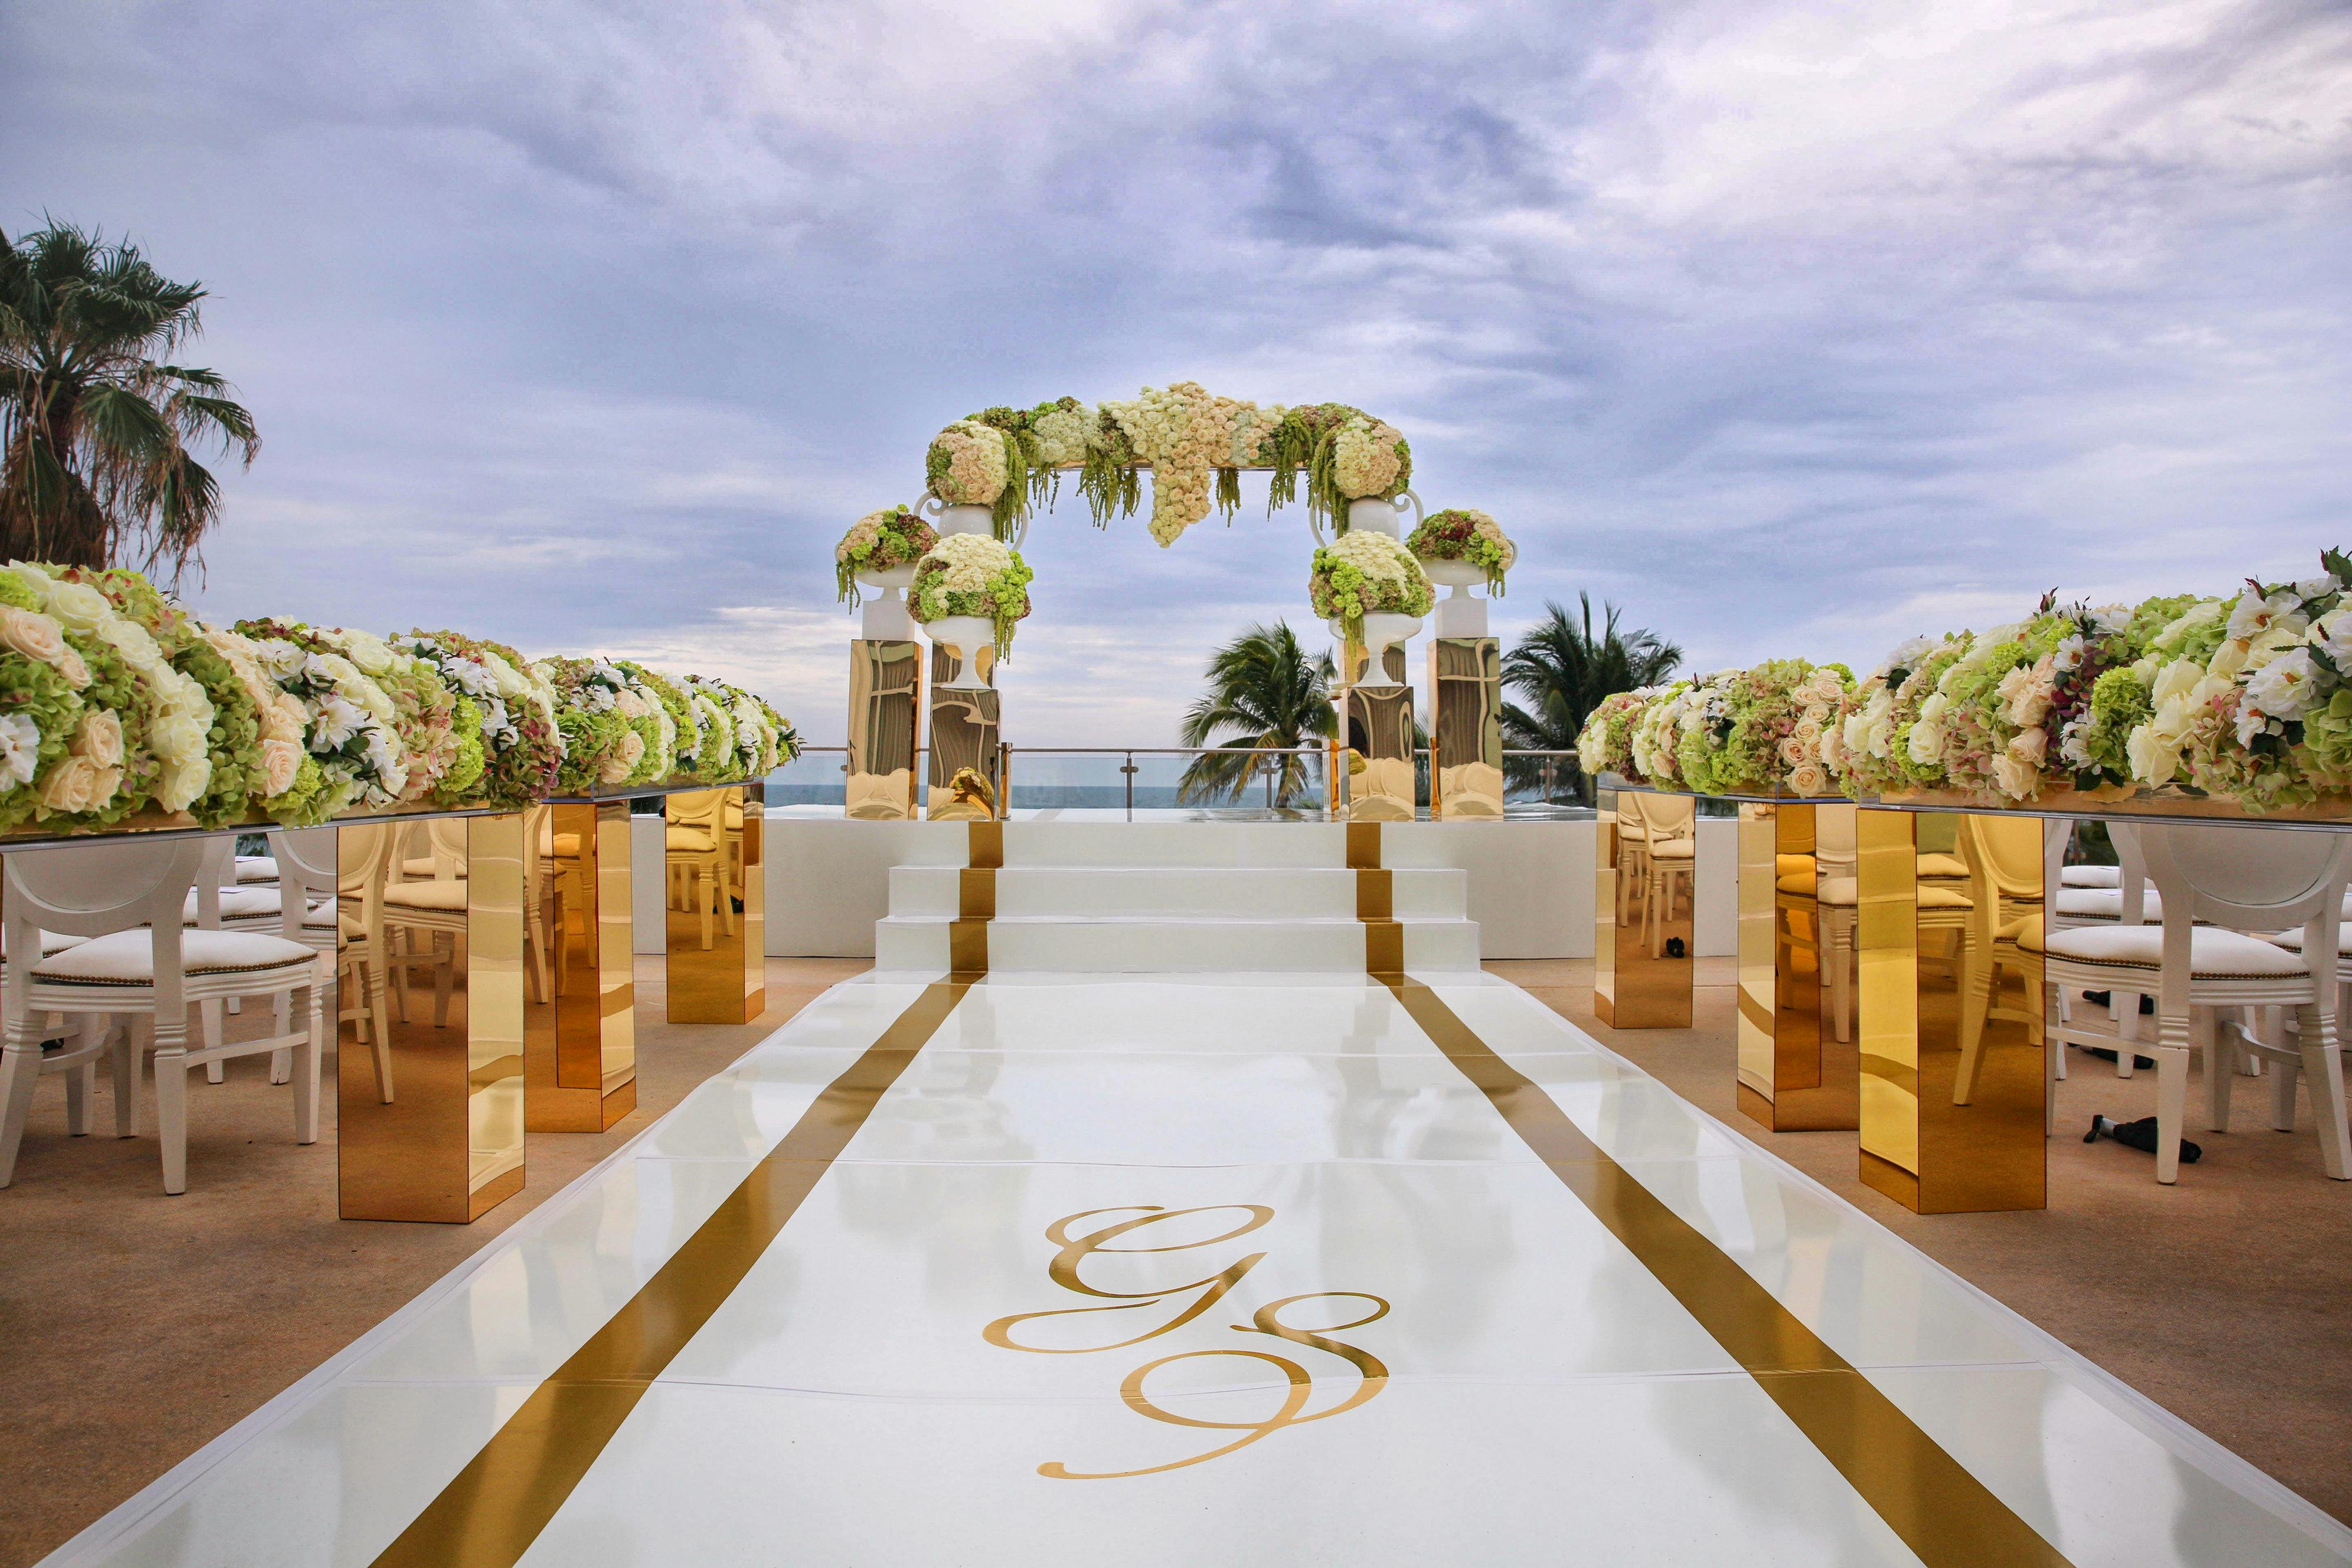 Oceanfront wedding with white, gold and floral decor | PartySlate